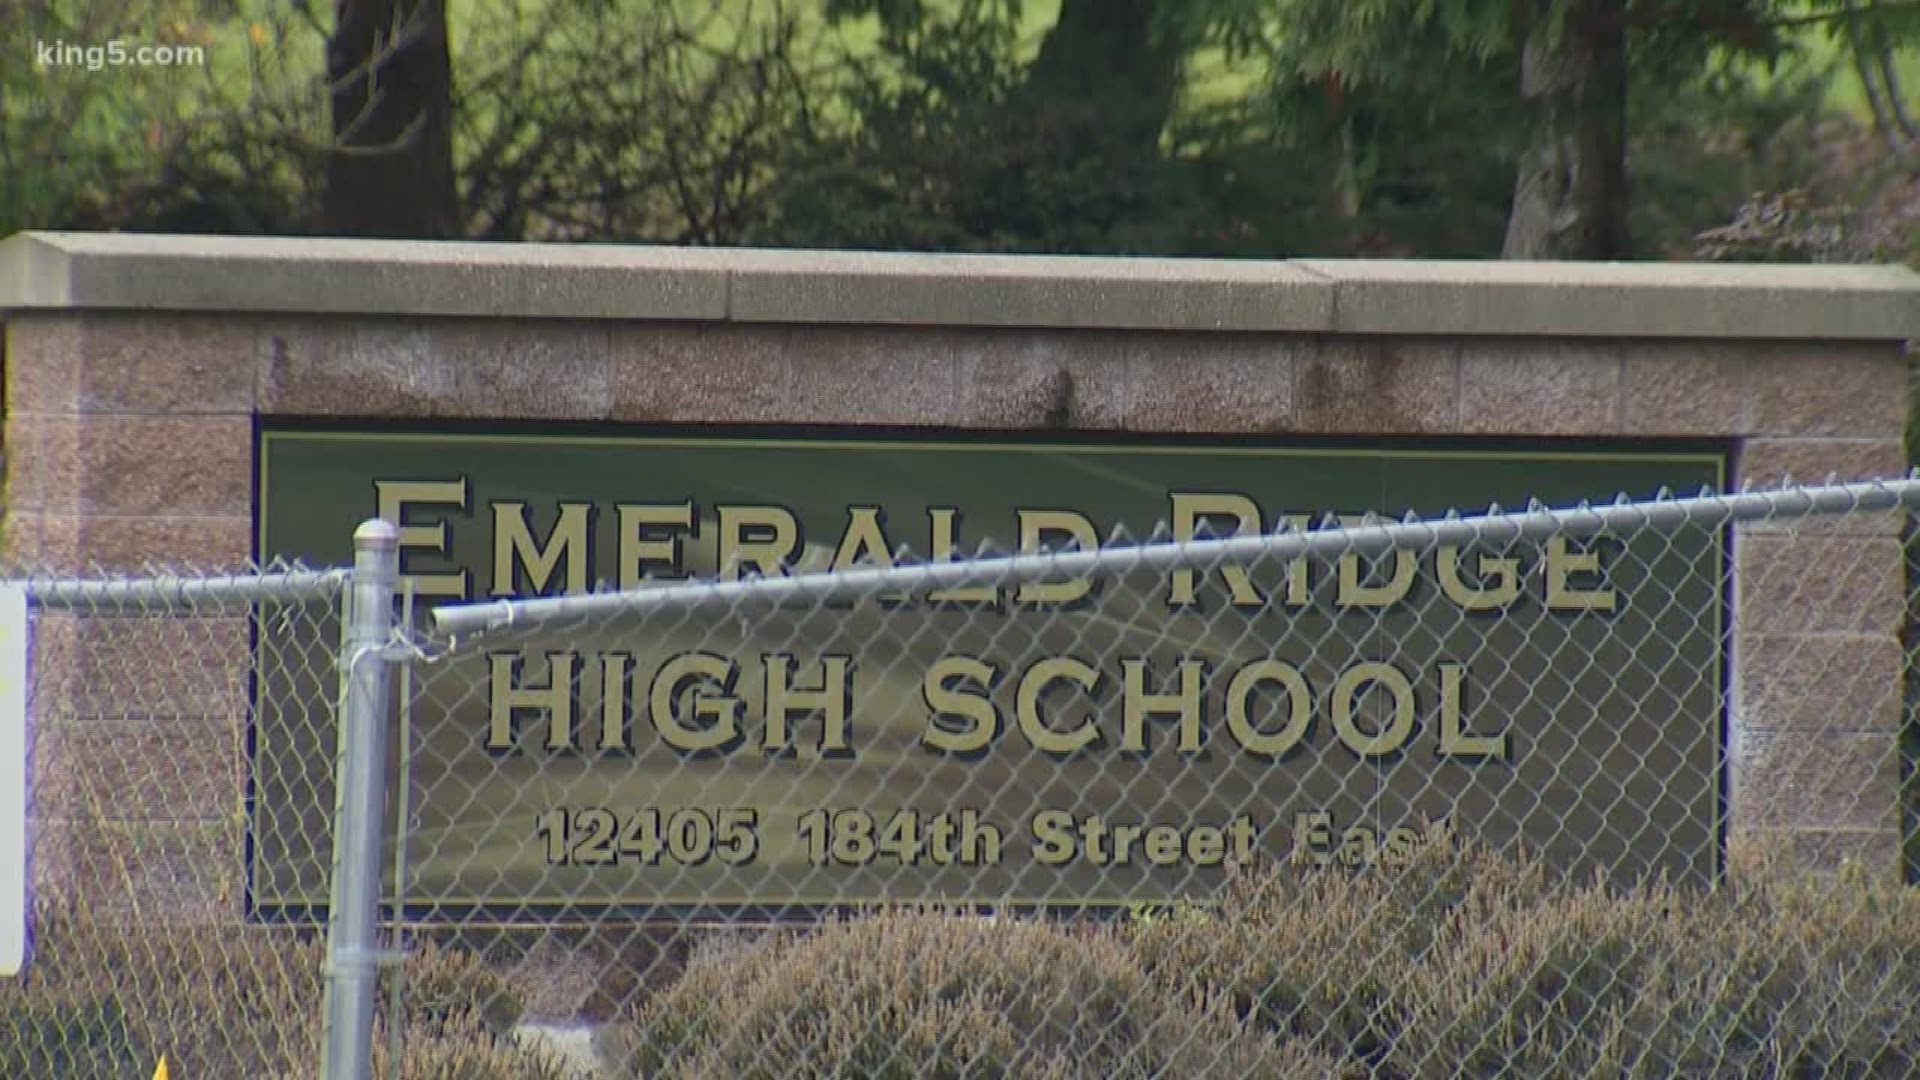 A teacher at Emerald Ridge High School is accused of threatening to shoot students during a conversation with a caseworker.